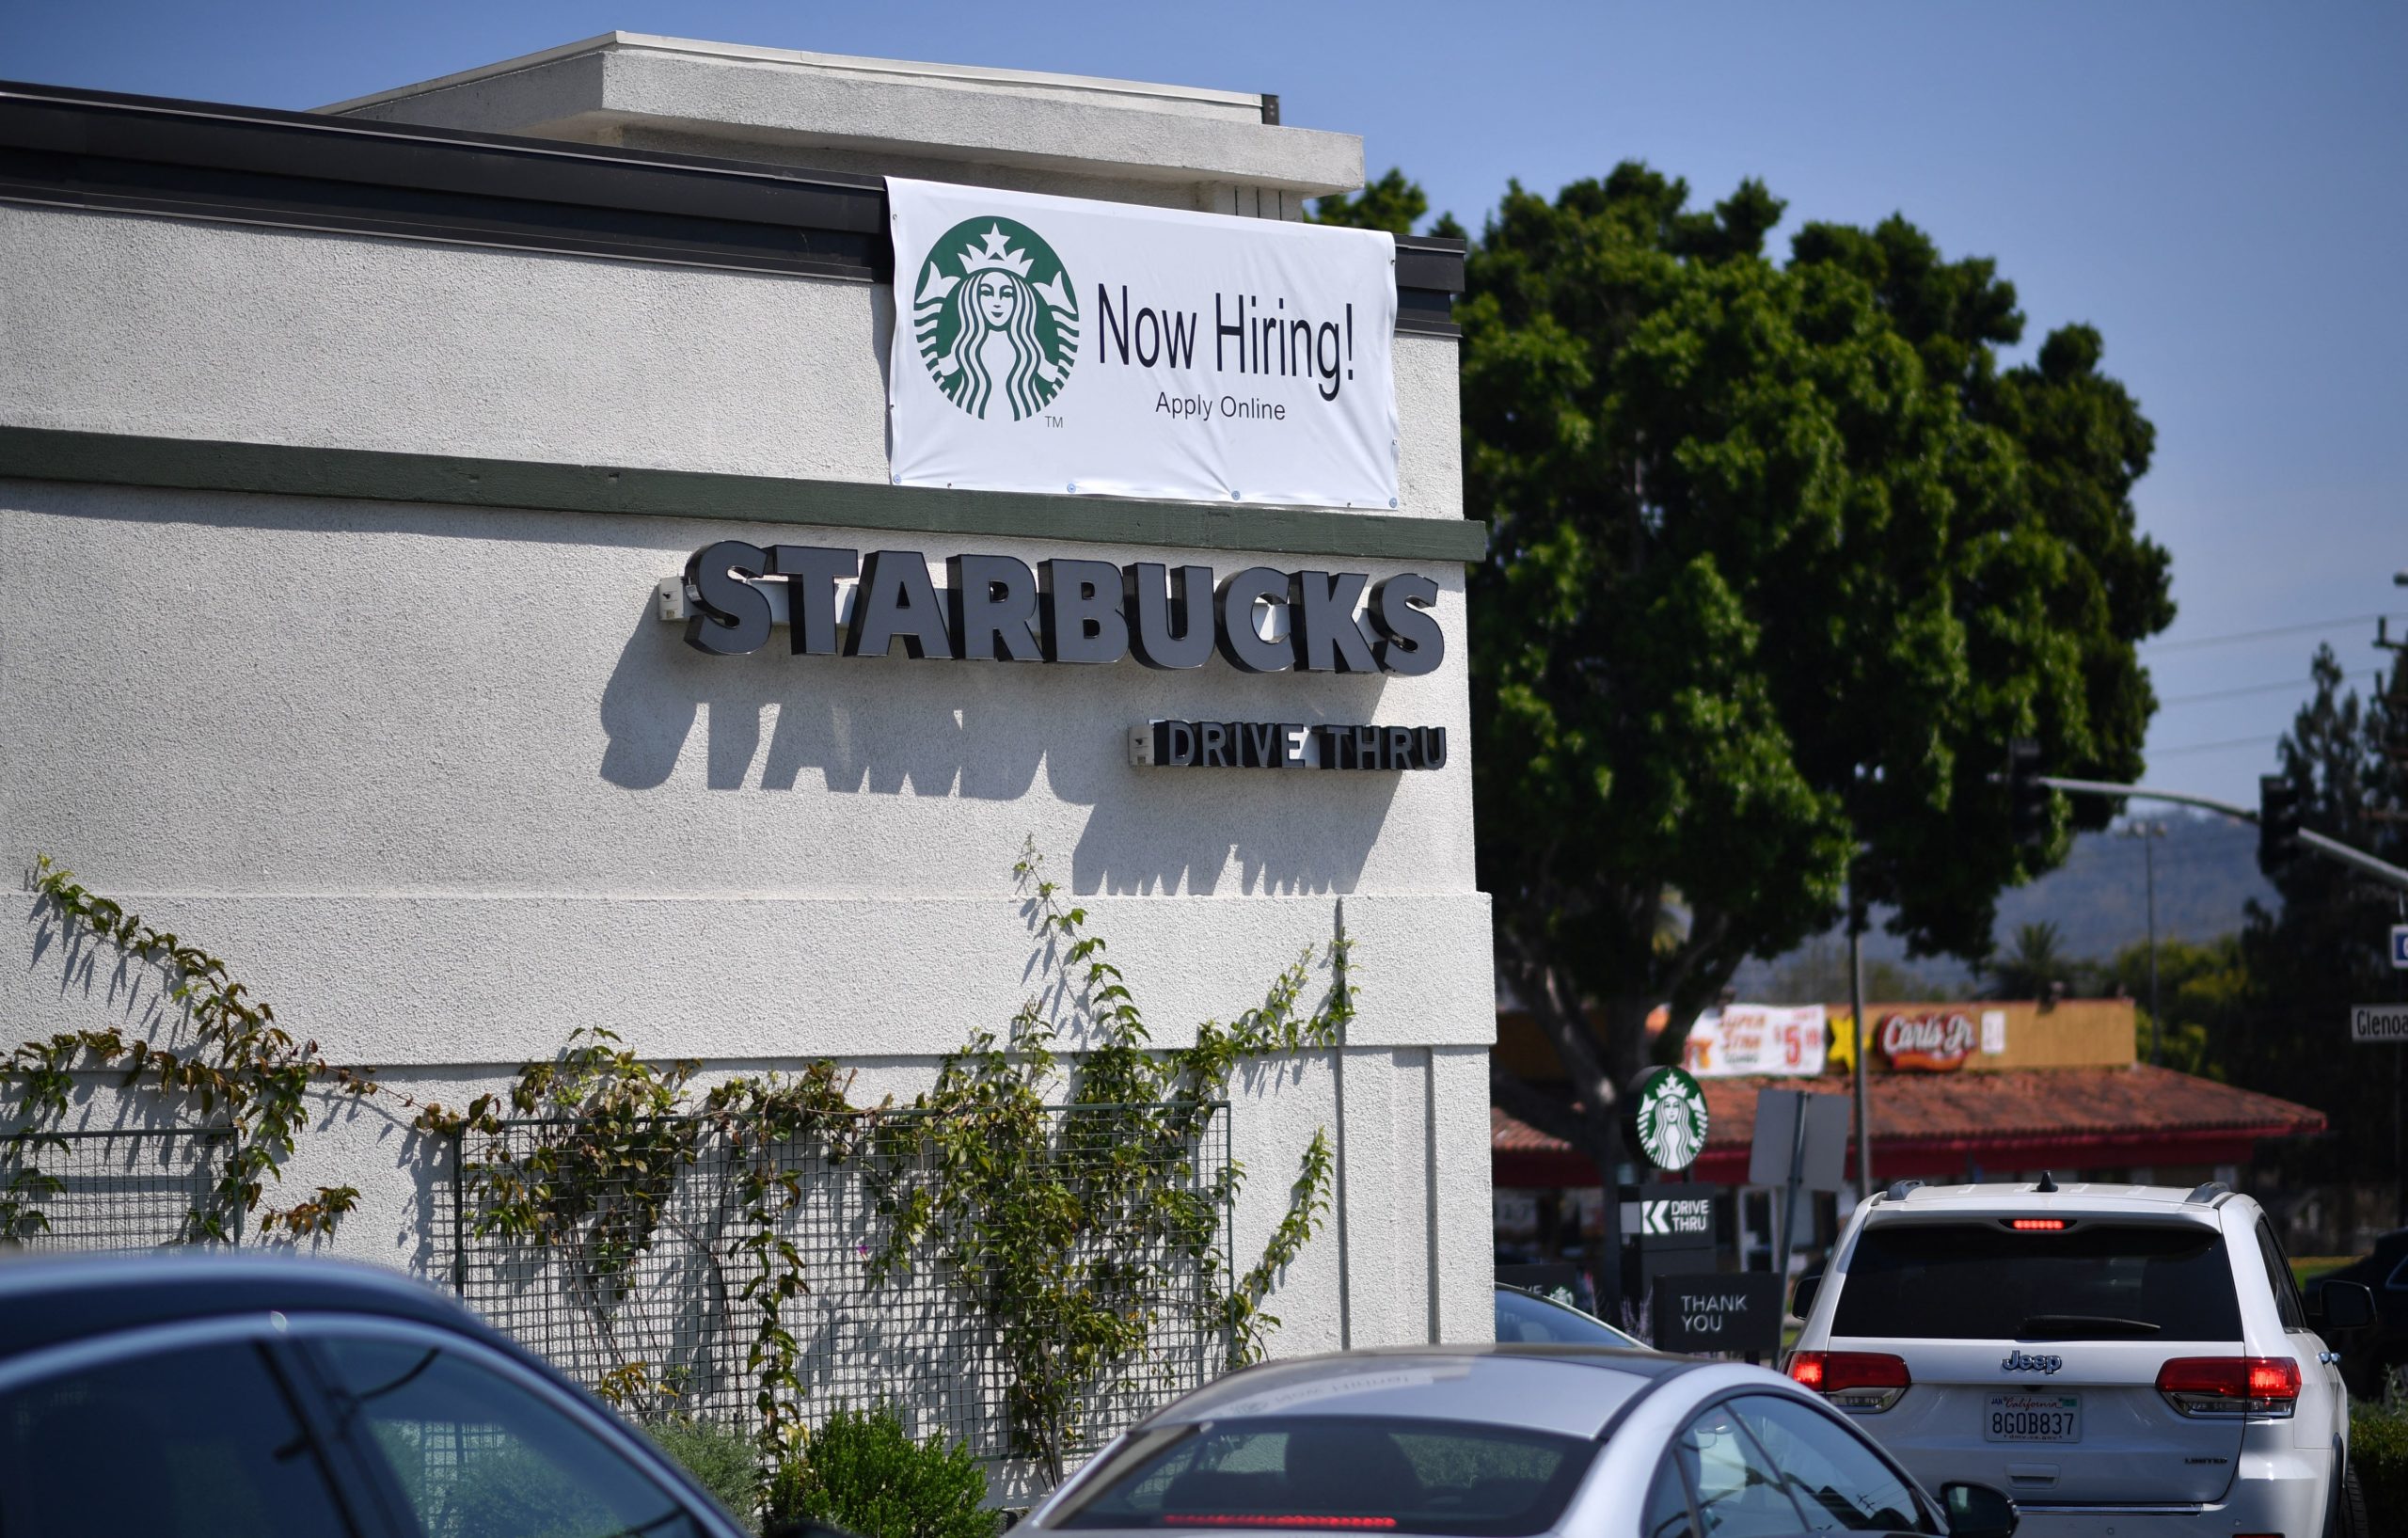 A "Now Hiring" sign is displayed outside a Starbucks drive-thru in Glendale, California. (Robyn Beck/AFP via Getty Images)